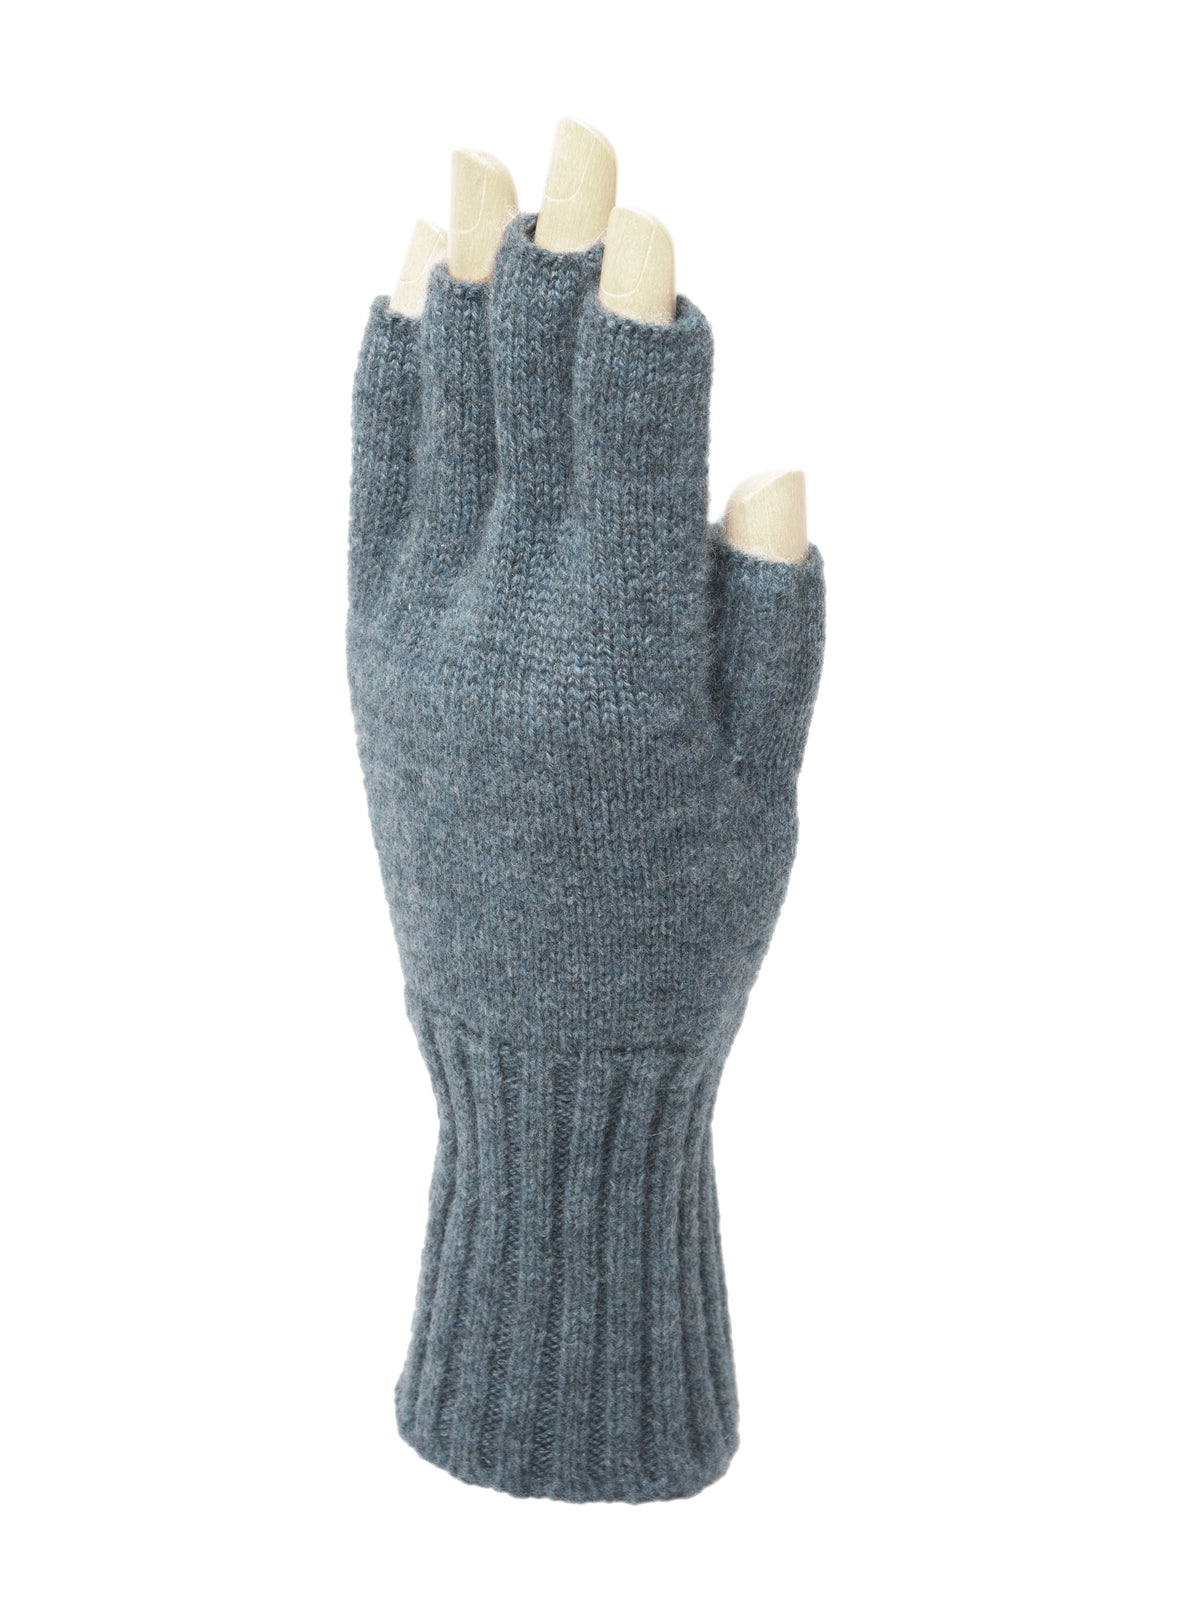 Cashmere Fingerless Gloves—Heather Storm – The Art Institute of Chicago  Museum Shop